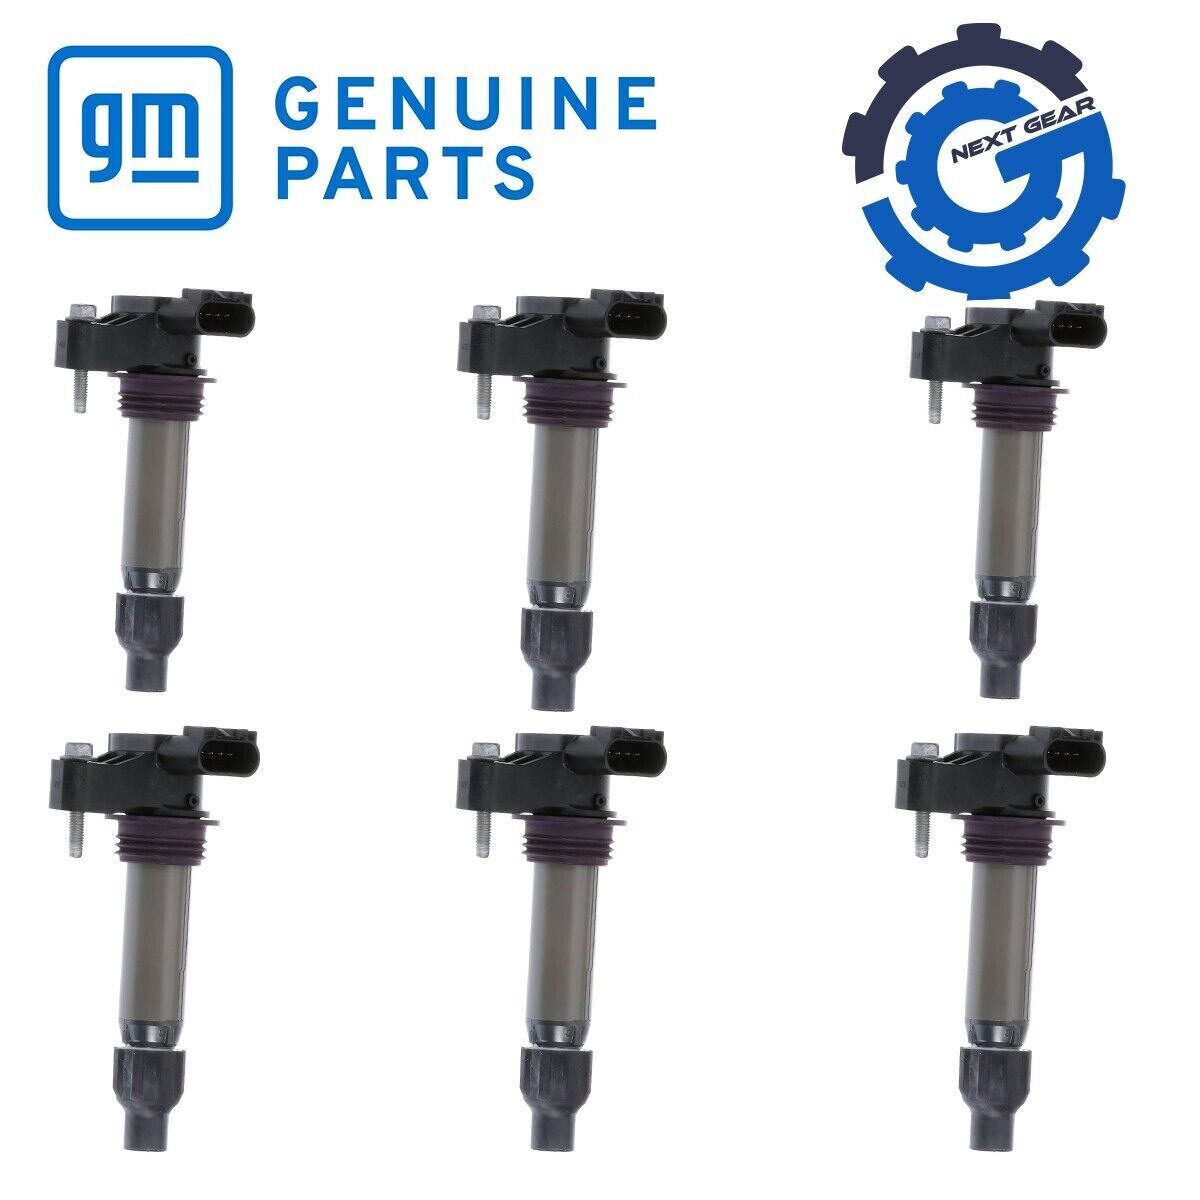 NEW OEM GM DENSO IGNITION COILS 2007-22 CHEVY GMC BUICK 12632479  (6 COILS) 3.6L